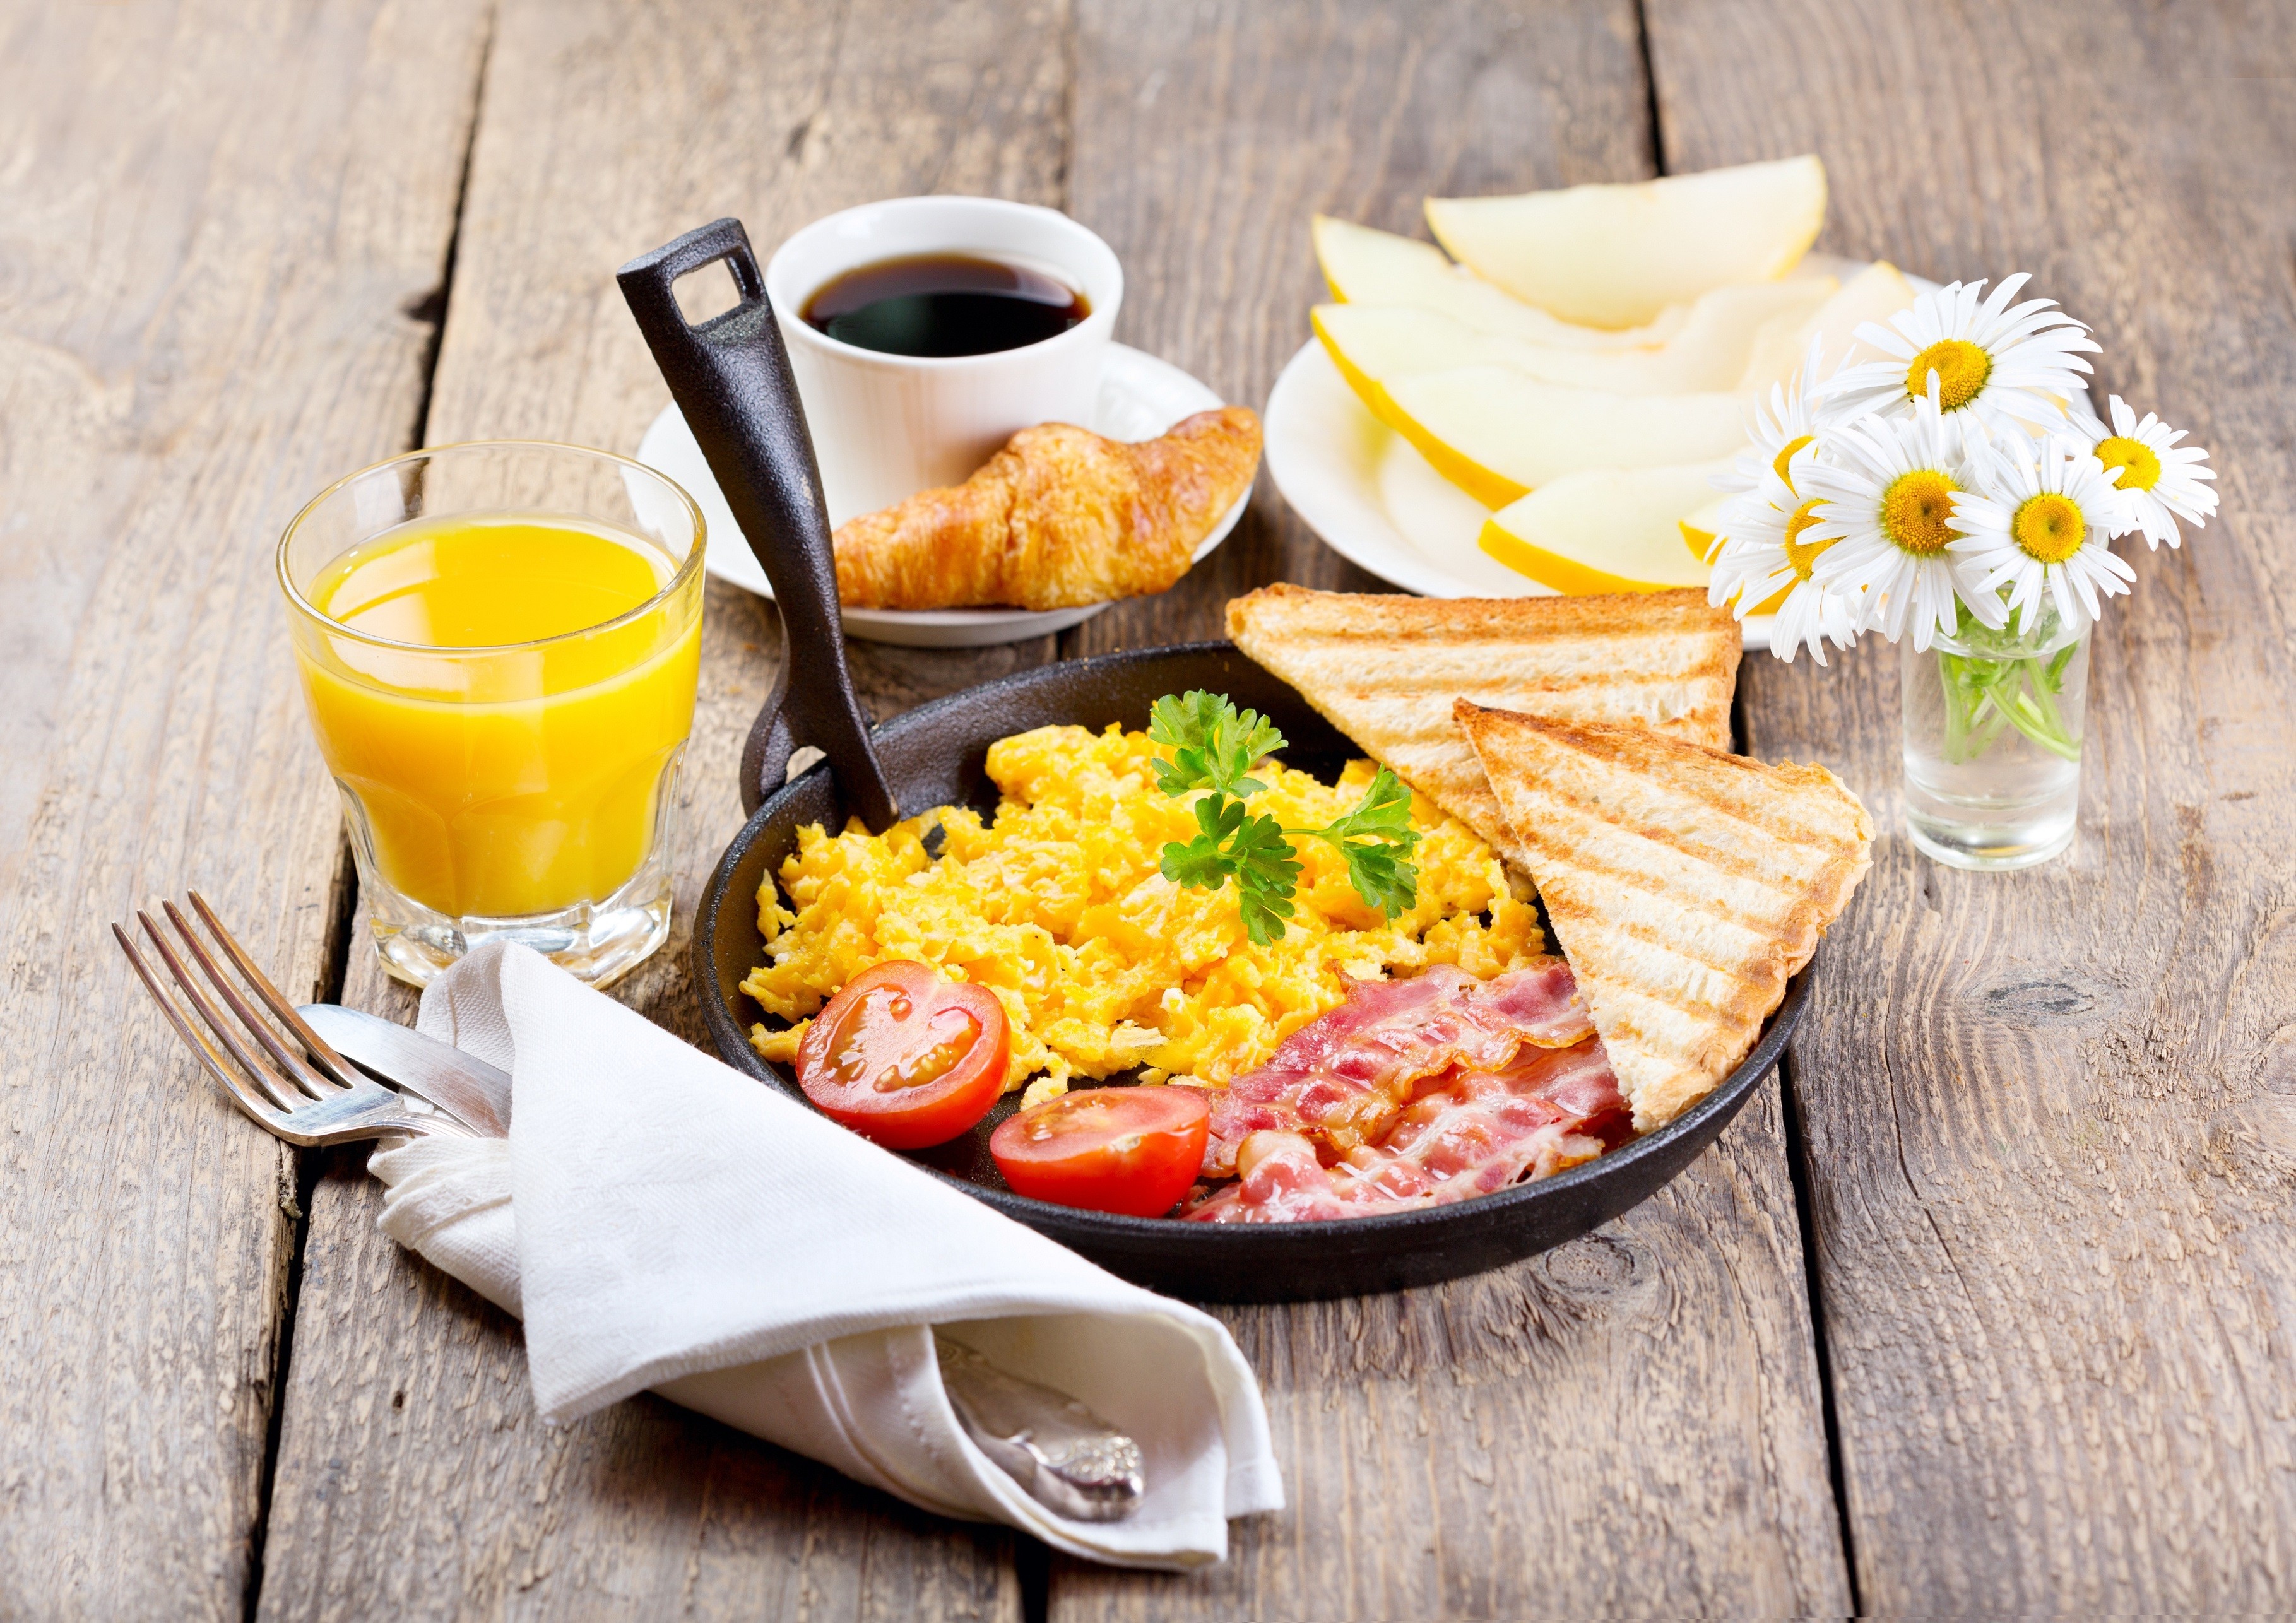 General 3638x2572 food breakfast coffee still life flowers eggs tomatoes bacon toasts juice croissants apples fork table knife wooden surface napkin